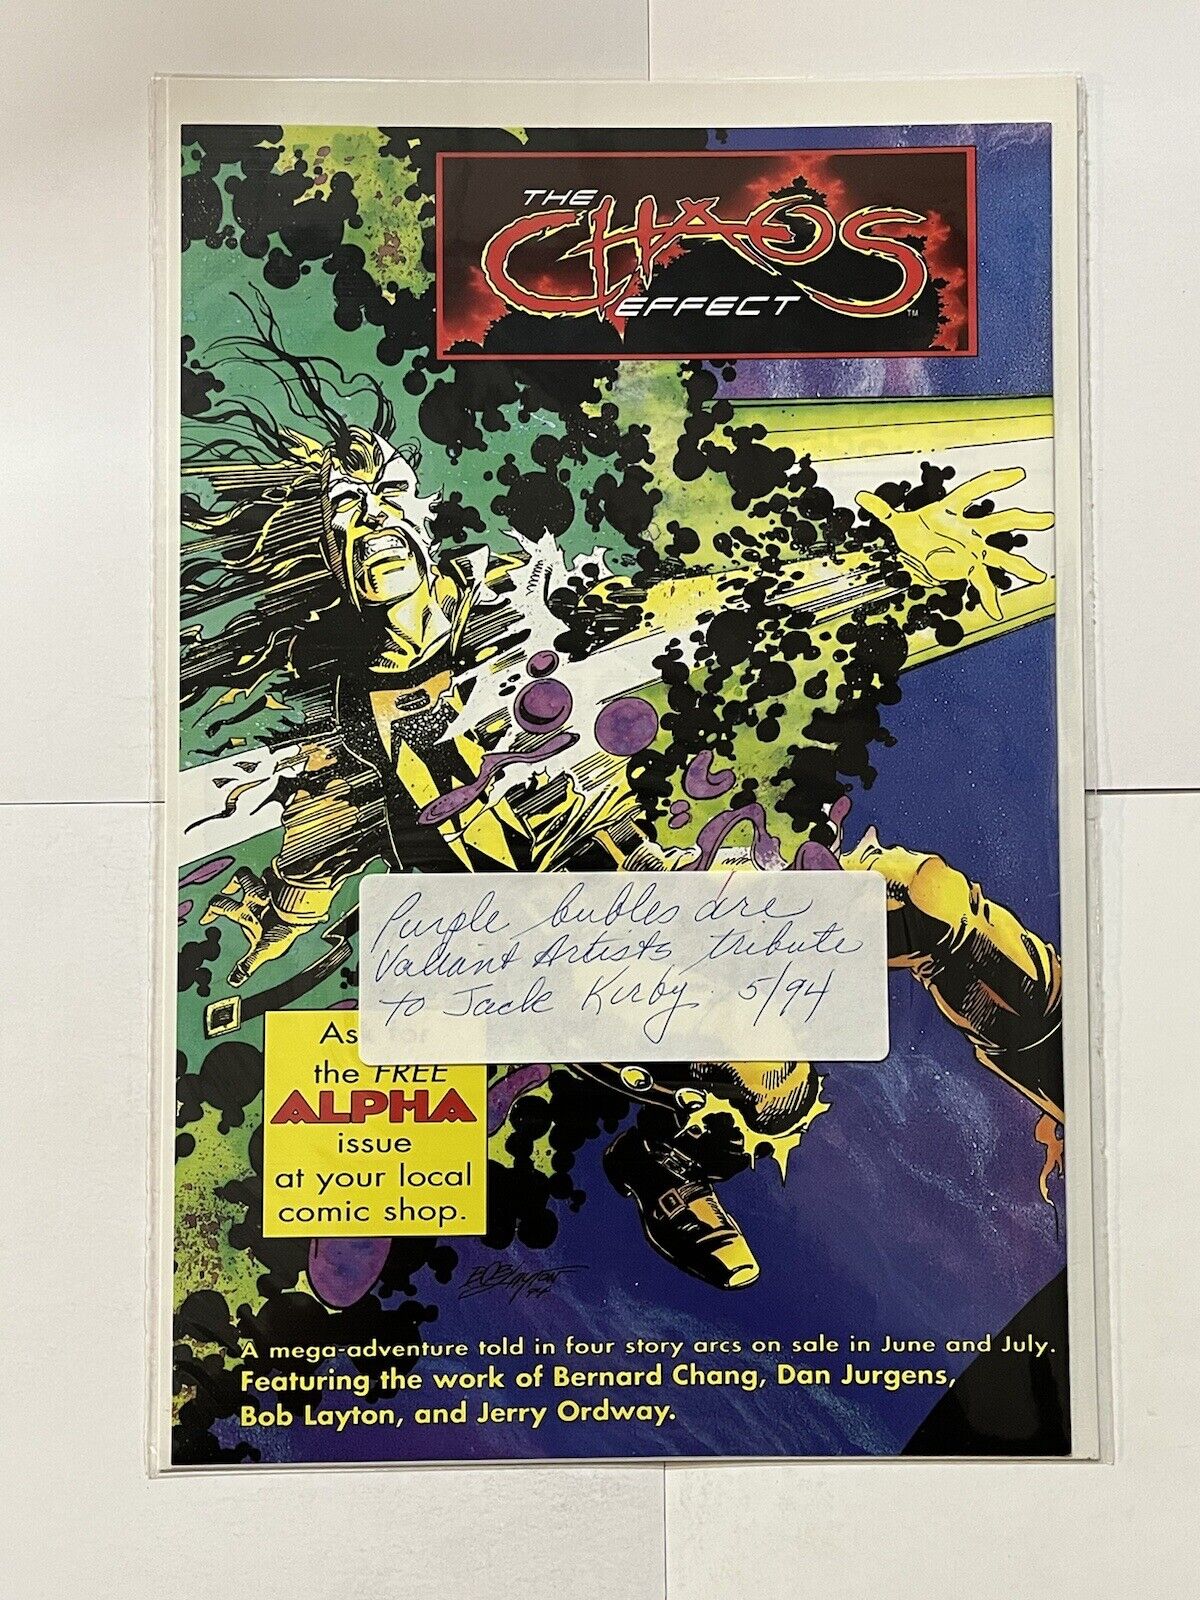 THE CHAOS EFFECT - Promotional Poster with Bob Layton art - Valiant Comics 1994 